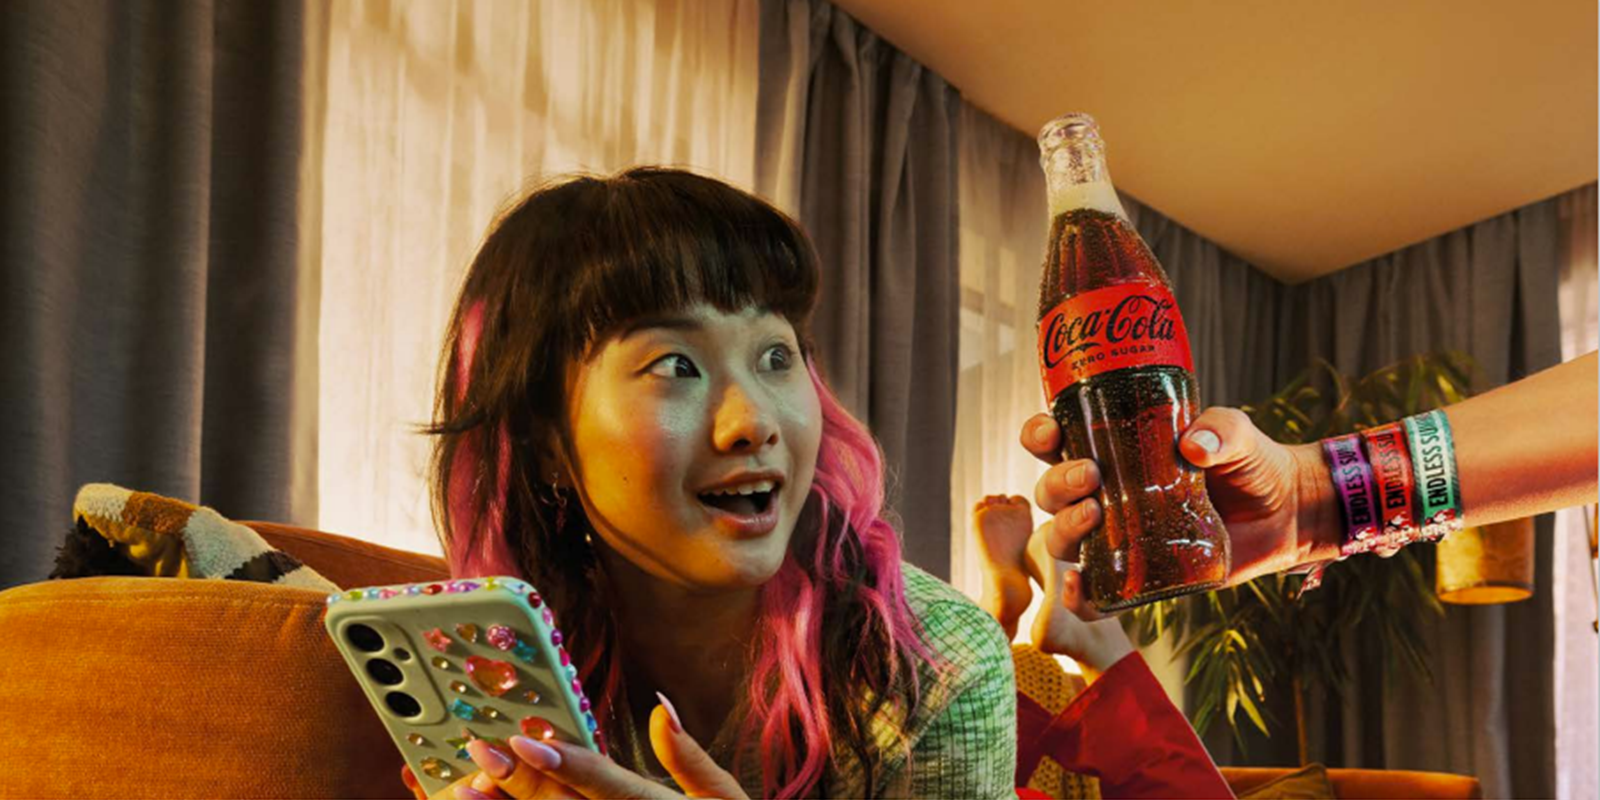 teenager scrolling on her phone looking at a glass bottle of coca-cola zero sugar